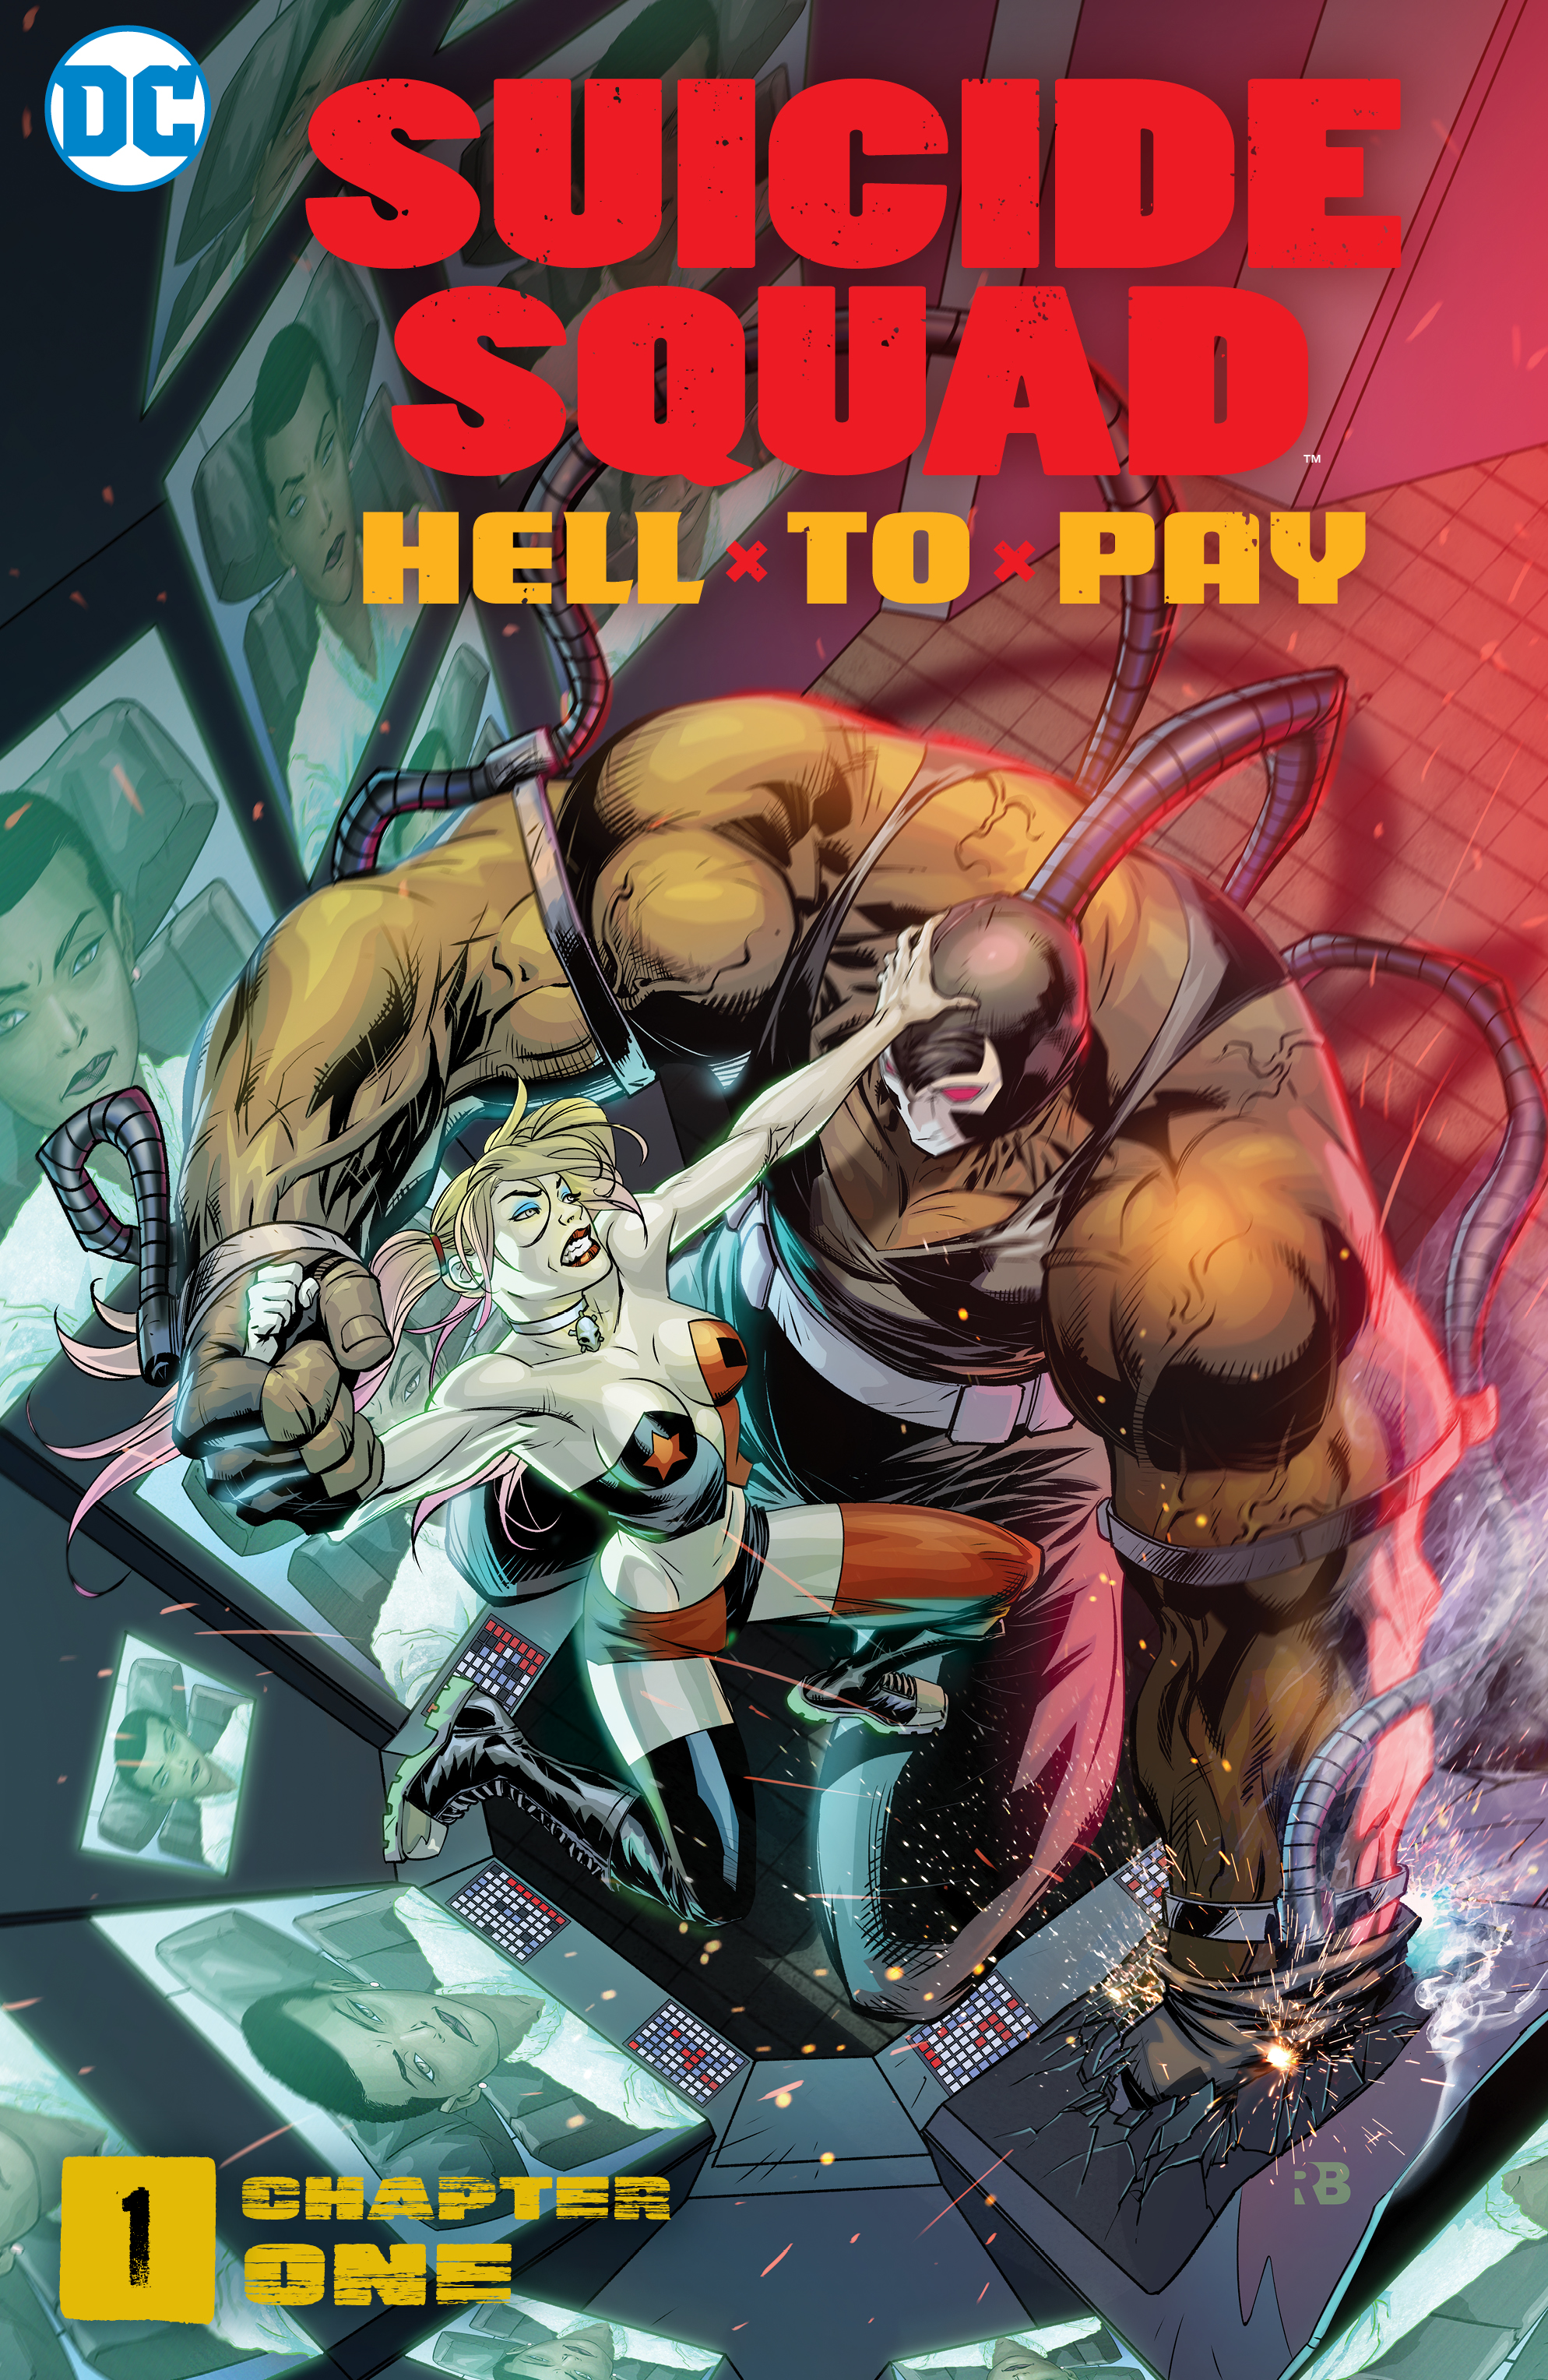 Win a Blu-ray of animated movie Suicide Squad: Hell To Pay